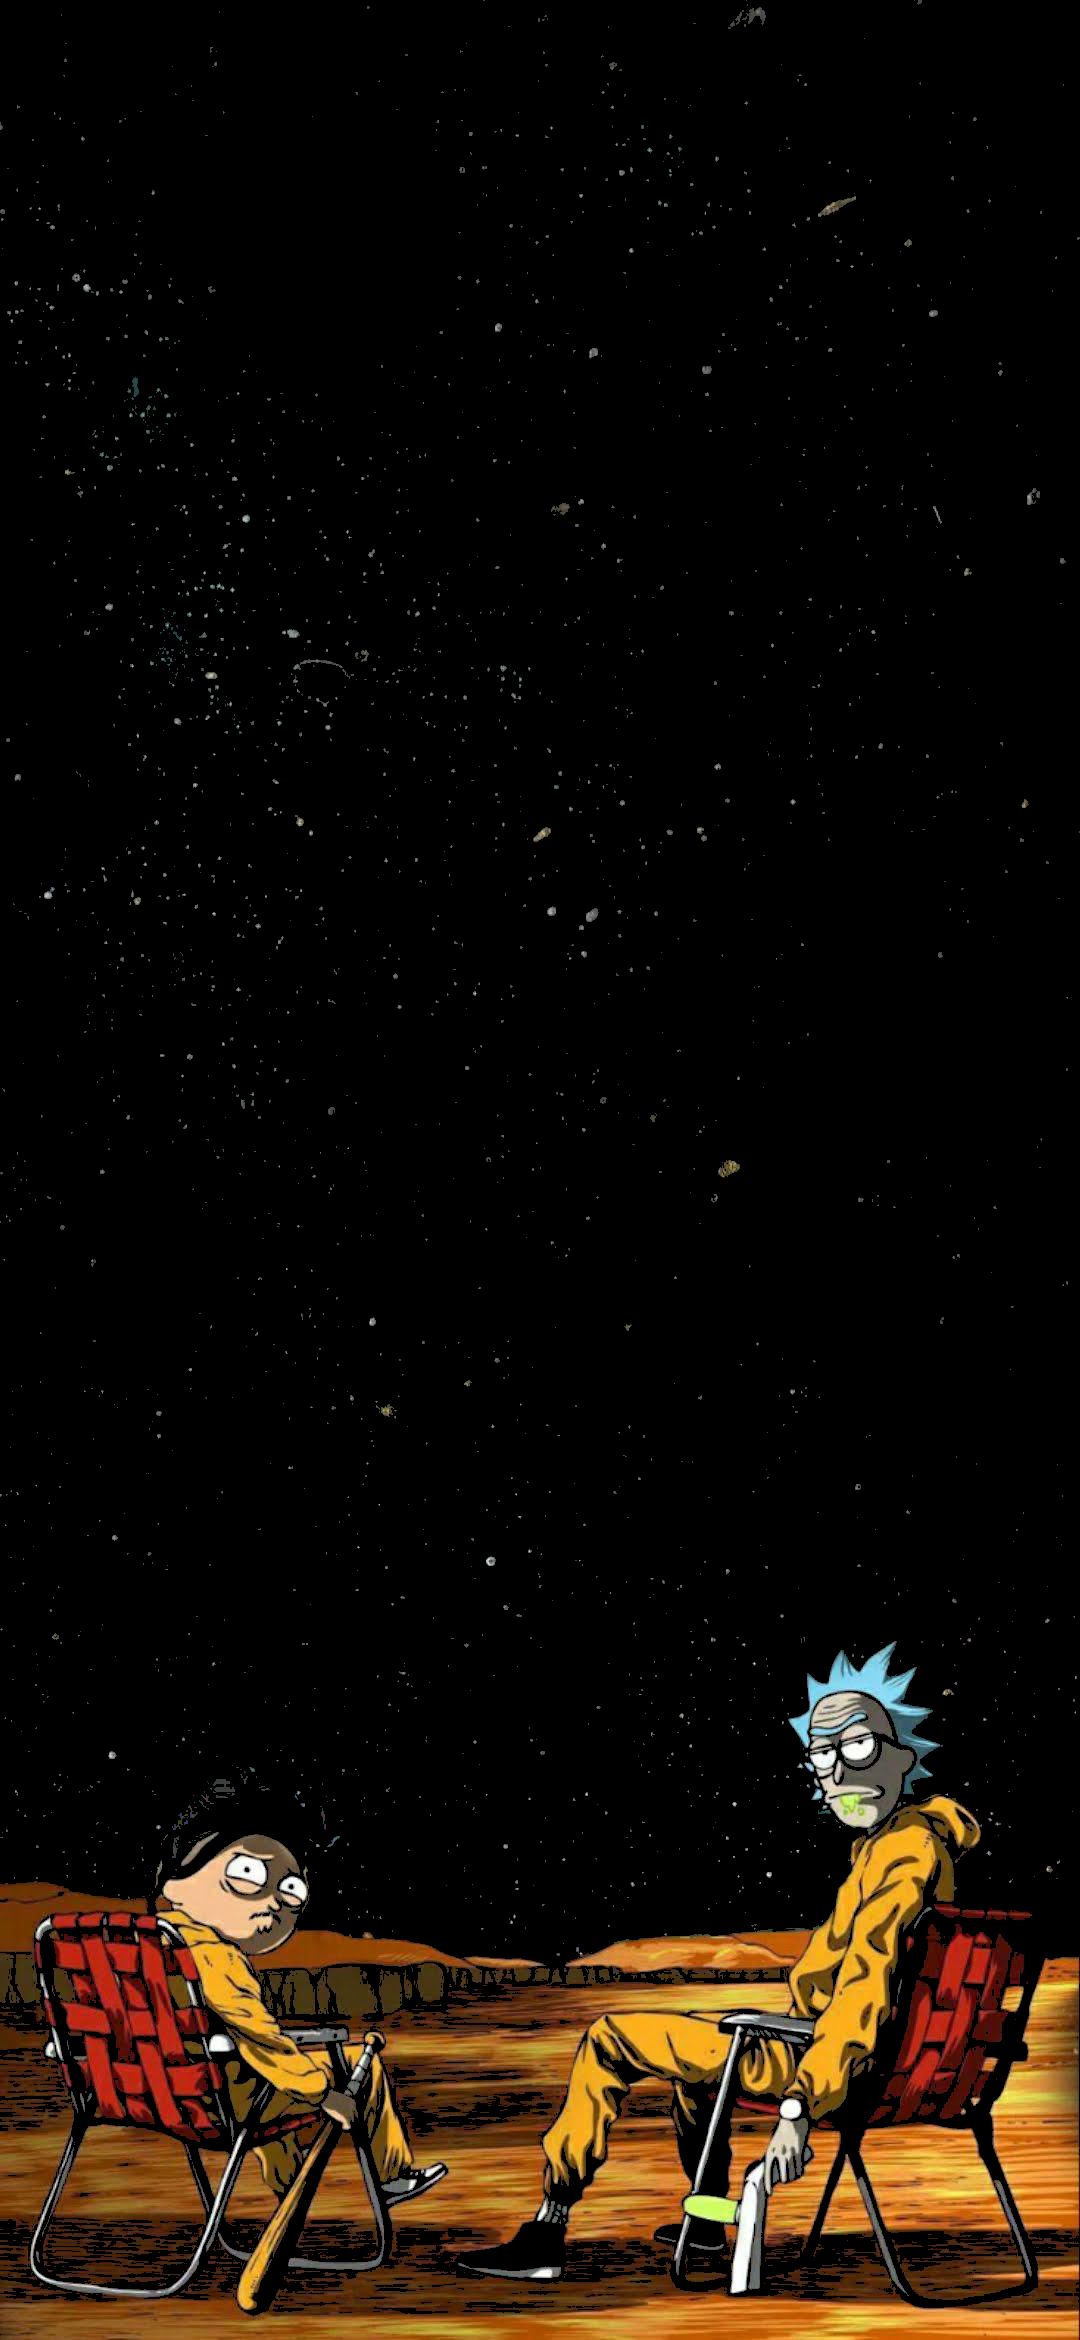 Rick And Morty Black Amoled Wallpapers - Wallpaper Cave